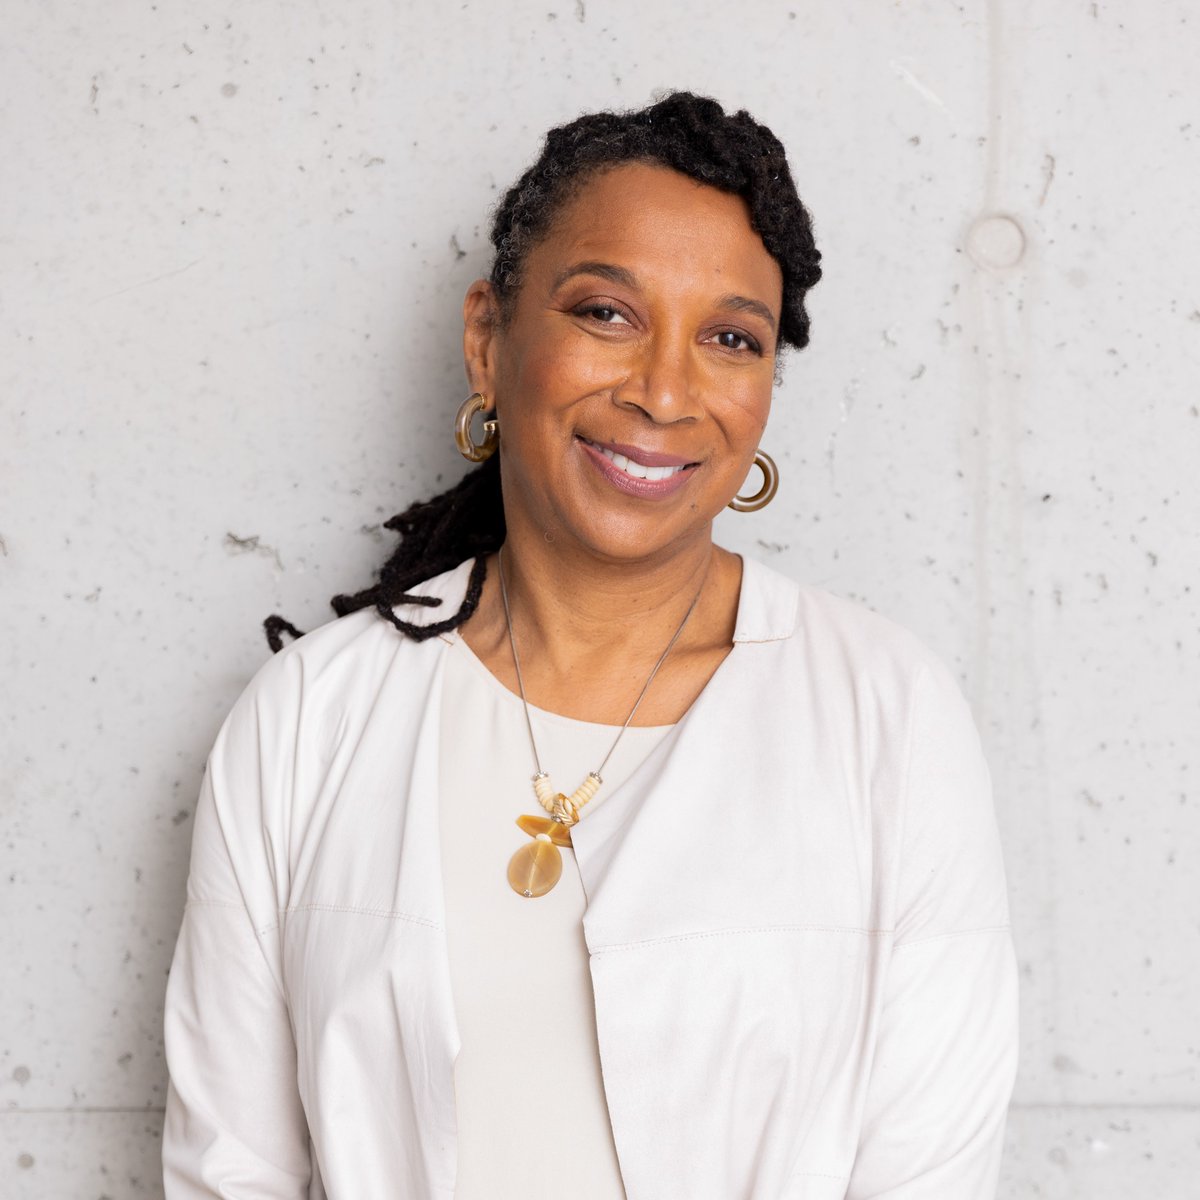 Join us for the #AERA24 Opening Plenary Keynote Lecture, titled “Fighting Back to Move Forward: Defending the Freedom to Learn In the War Against Woke,” delivered by @sandylocks on April 11 at 6:10 pm ET in Ballroom AB of the Pennsylvania Convention Center.…